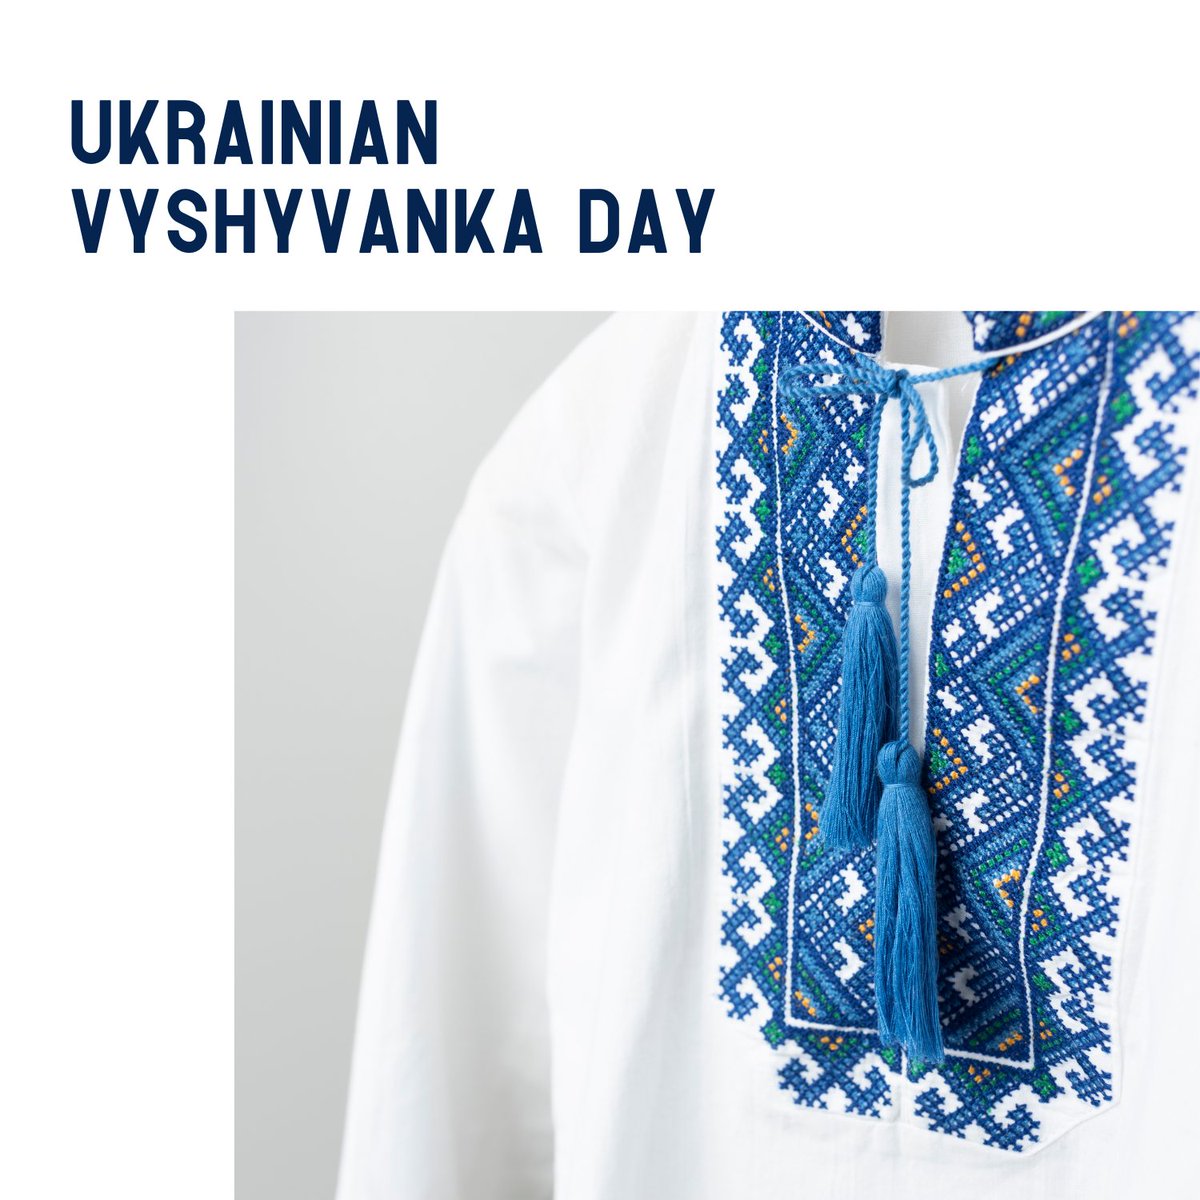 I want to wish a very happy Vyshyvanka Day to Ukrainian people across our province, country, and world. #ukrainianvyshyvankaday #ukrainian